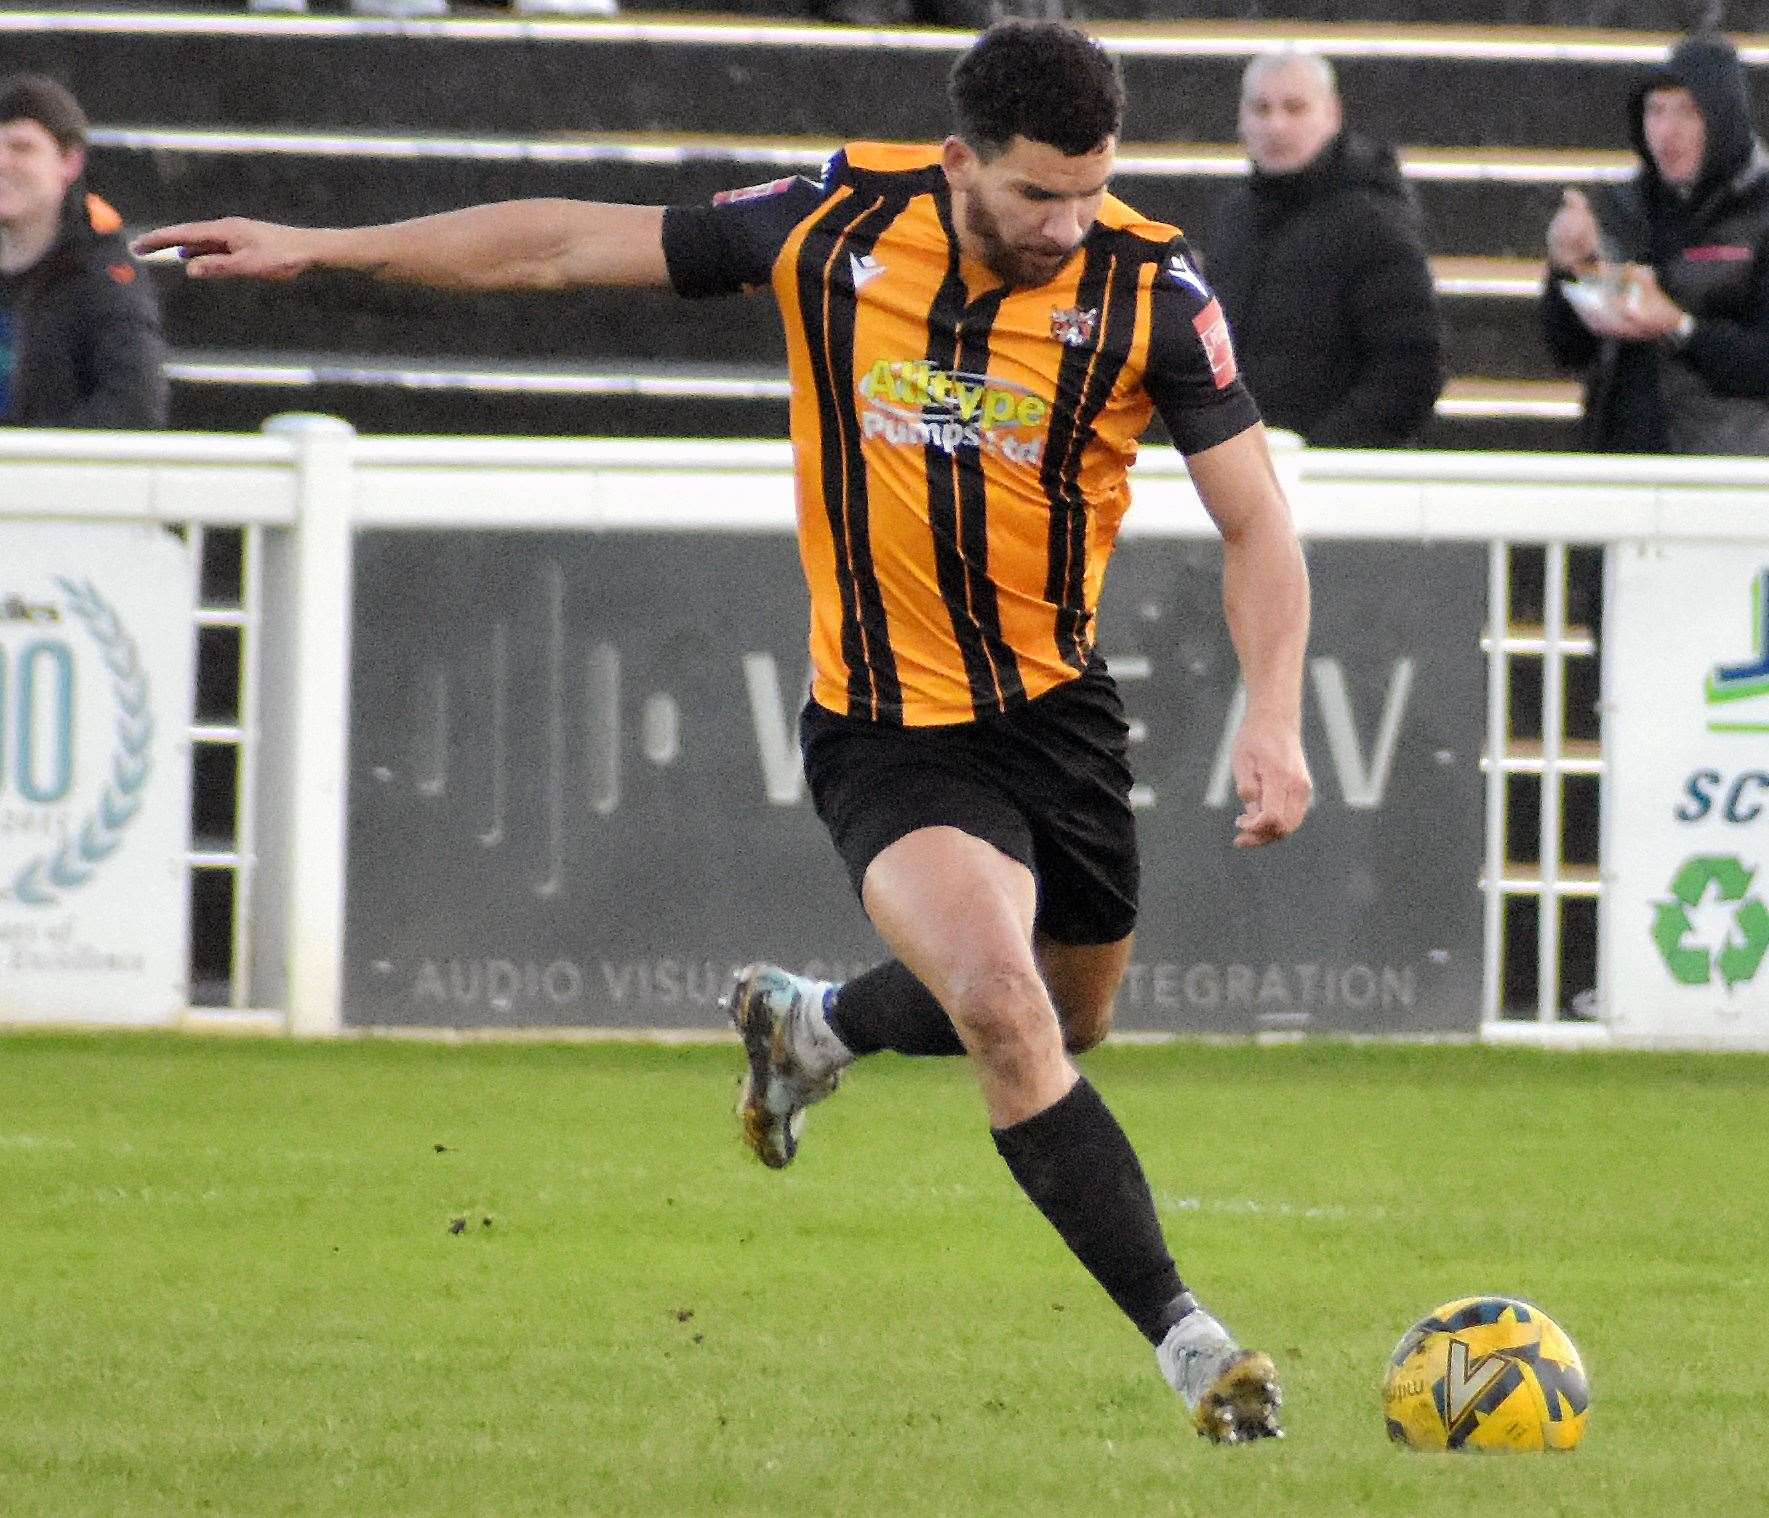 One of Folkestone's scorers, Nathan Green, sends the ball forward. Picture: Randolph File